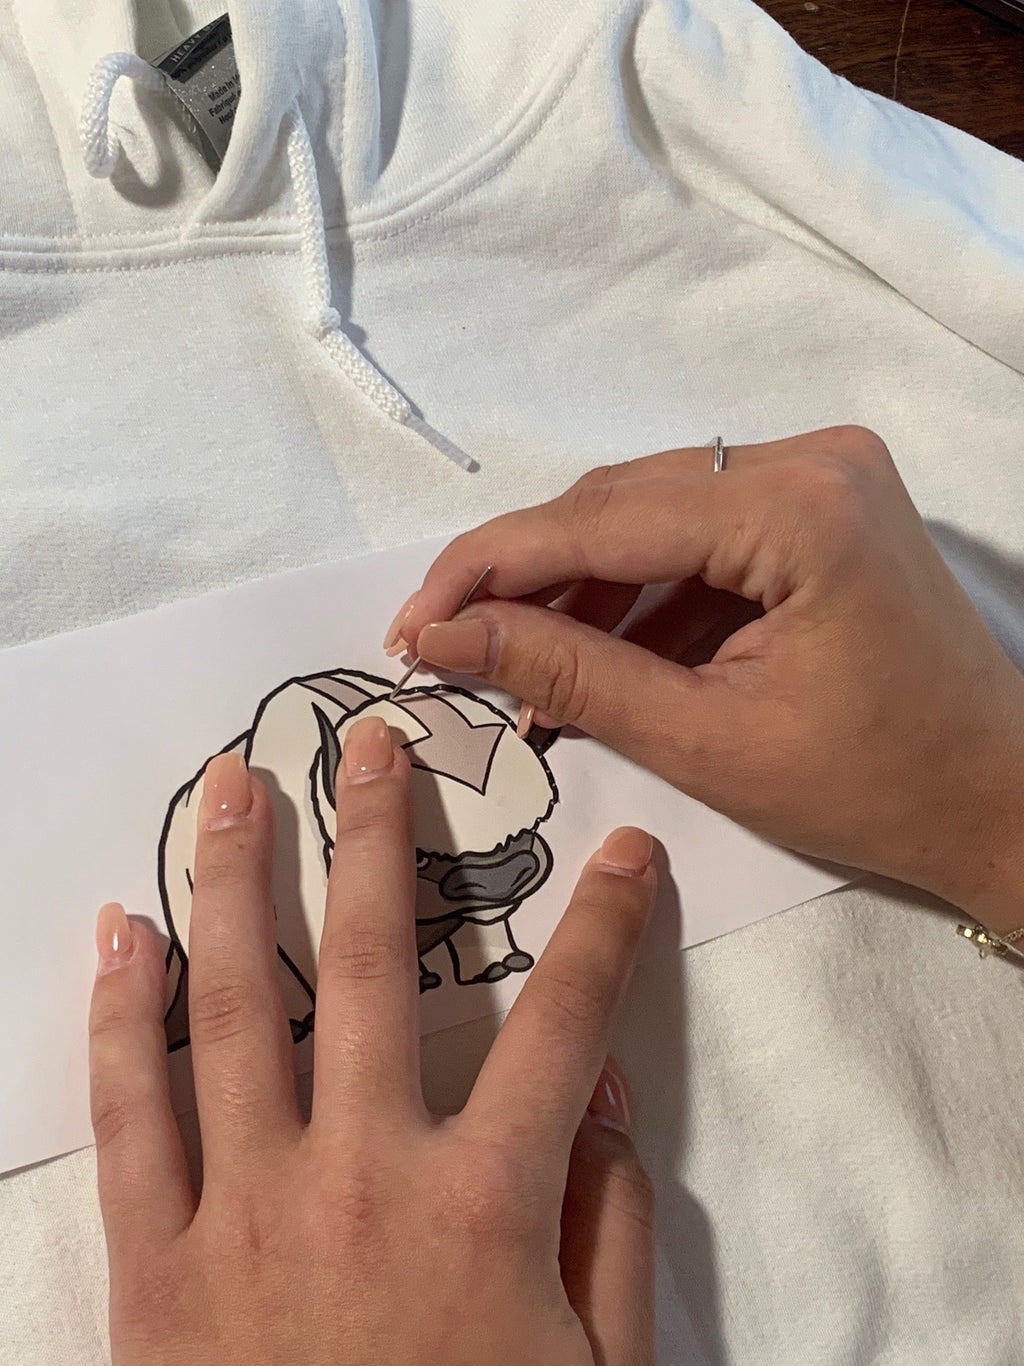 Step 1 appa embroidery, poking holes